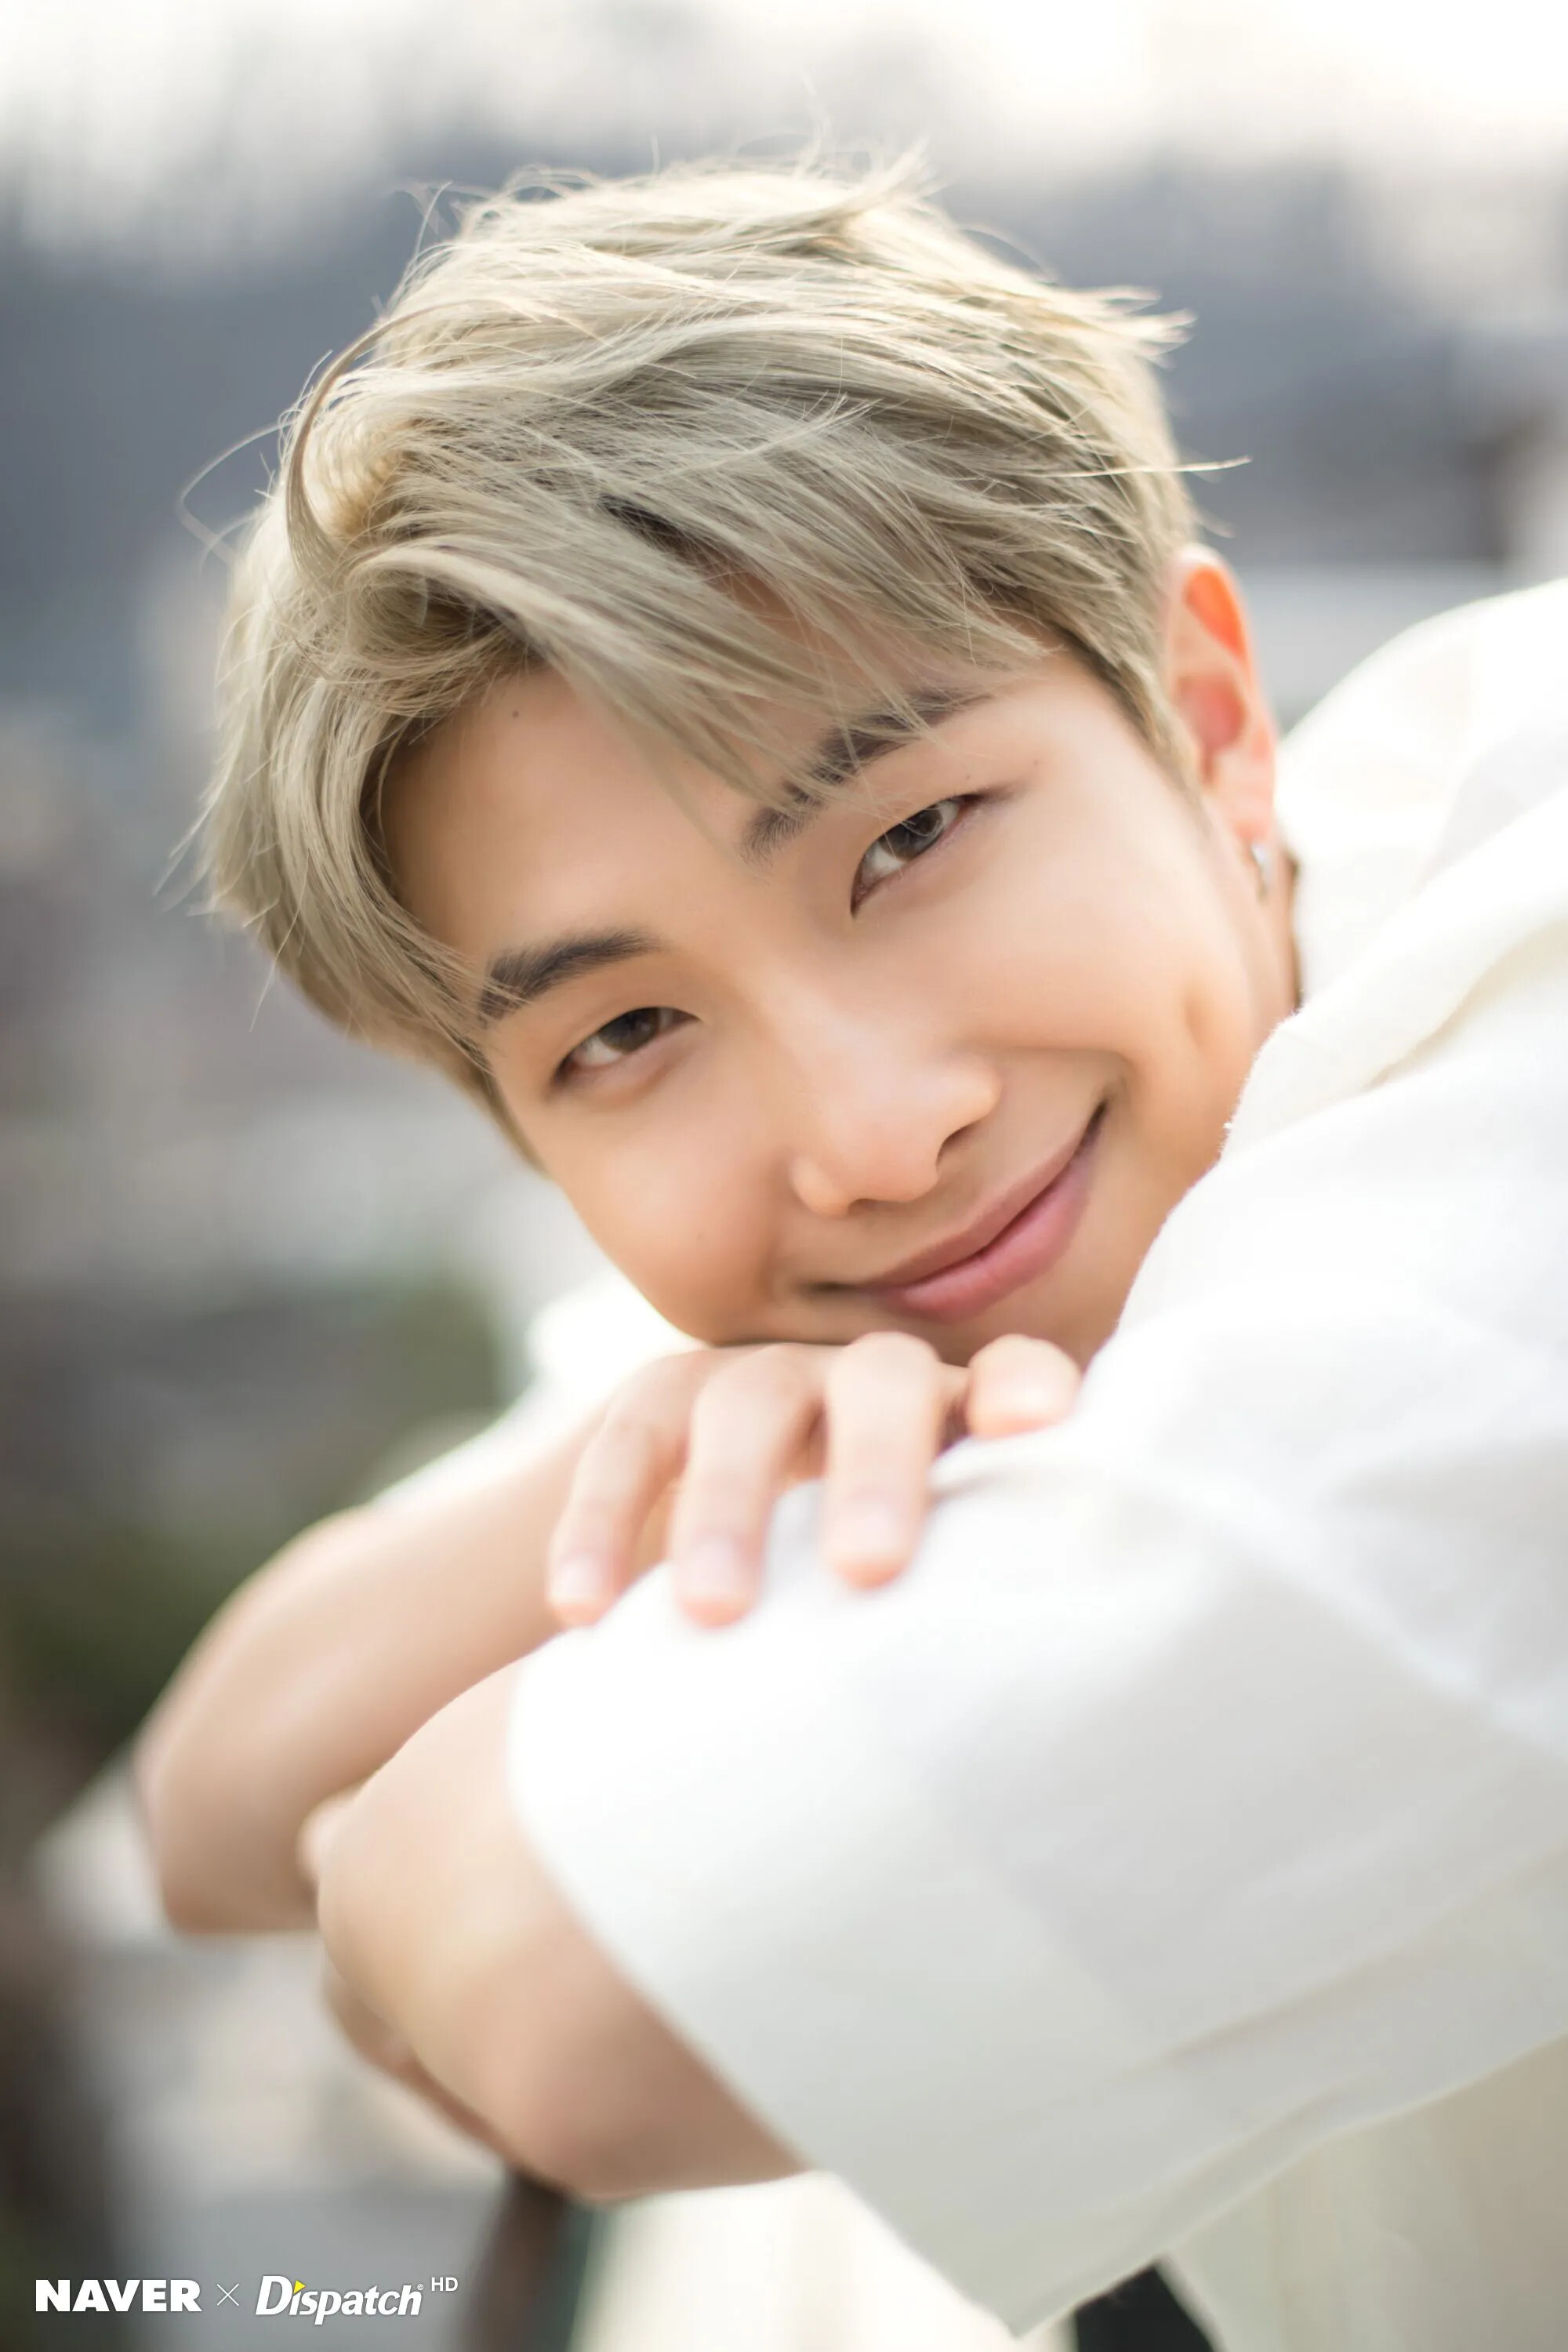 BTS' RM White Day special photo shoot by Naver x Dispatch Kpopping